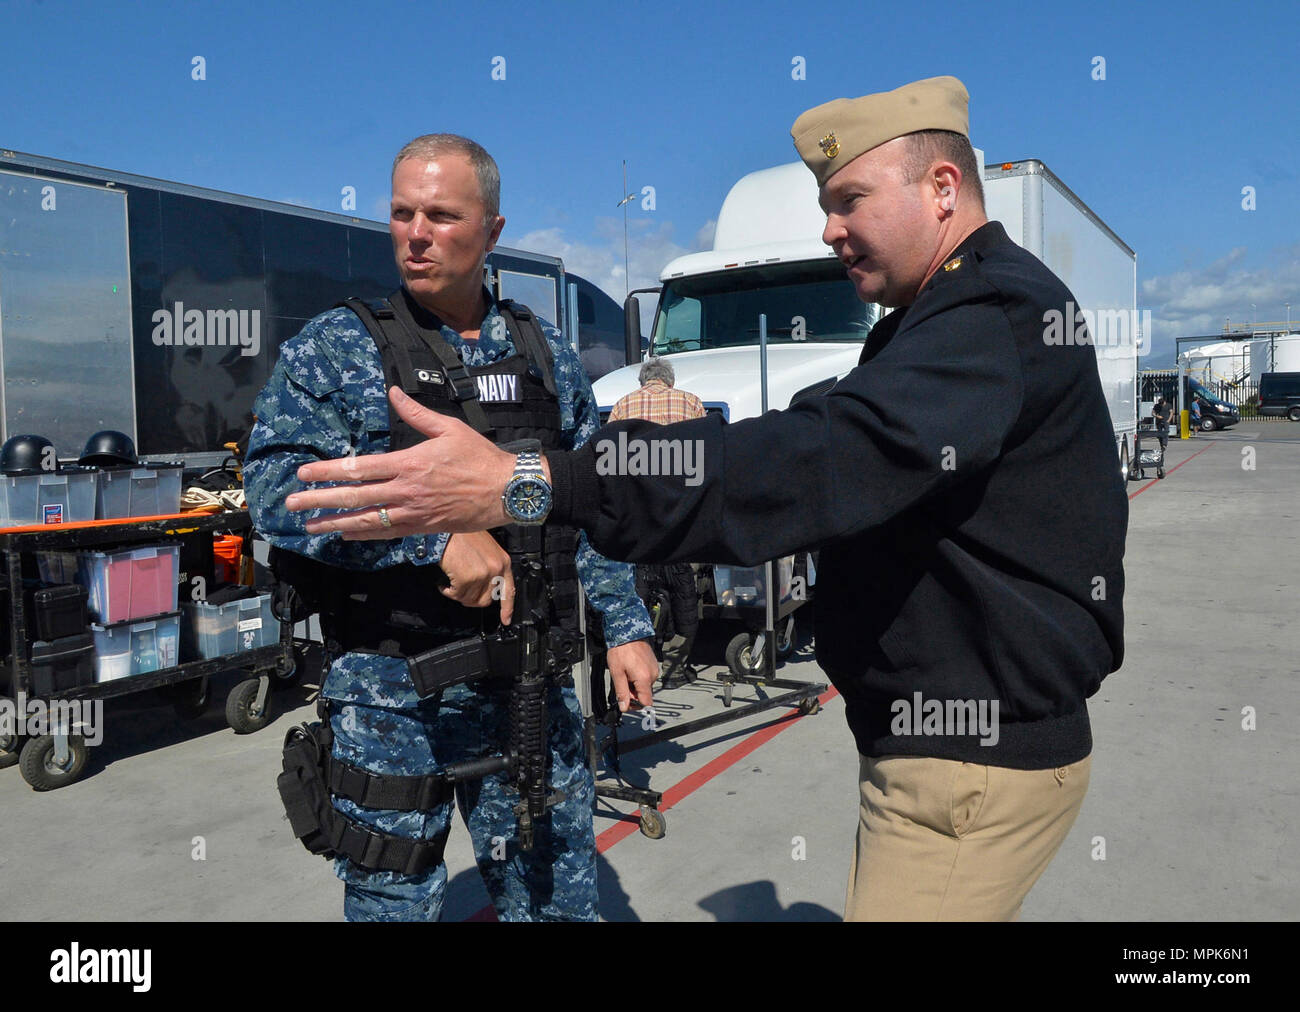 170323-N-IE405-013 SAN DIEGO (March 23, 2017) Naval Base San Diego Command Master Chief Matt Ruane explains the history of the California naval base to actor Adam Baldwin prior to the filming of the television show 'The Last Ship'. (U.S. Navy photo by Mass Communication Specialist 2nd Class Indra Bosko/Released) Stock Photo